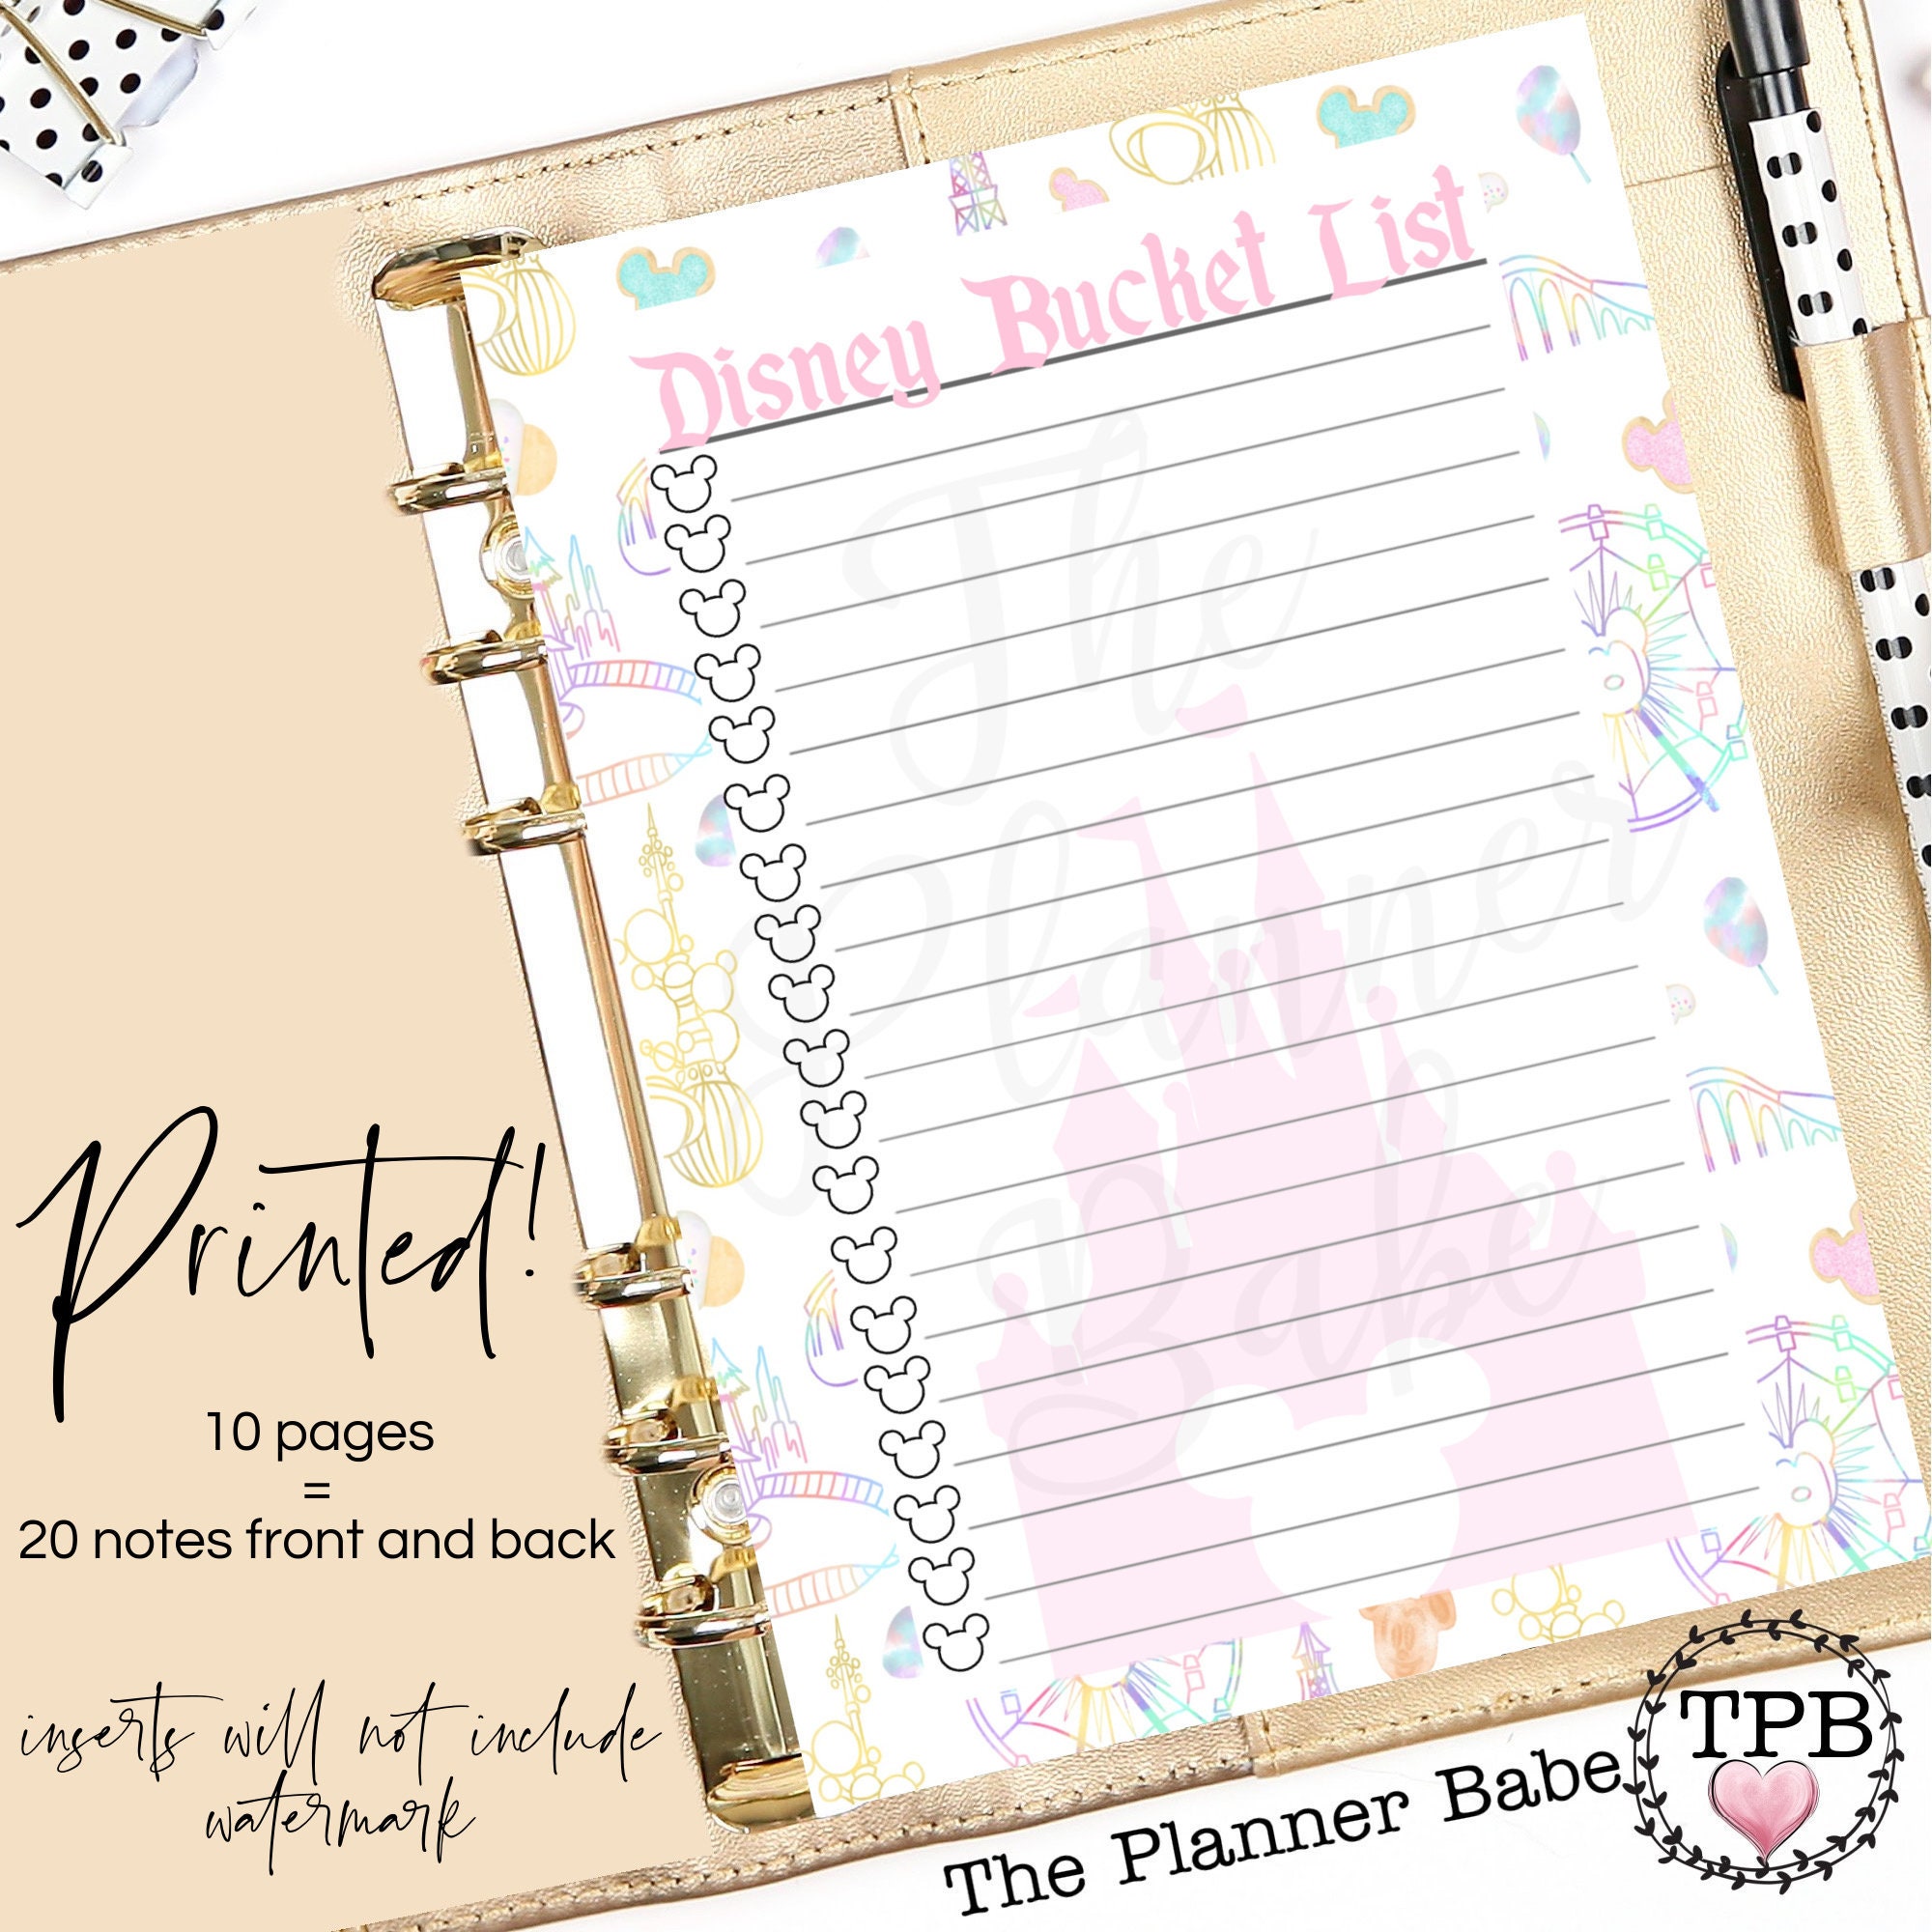 MONTHLY BUDGET 04 6 HOLES LOOSE LEAF INSERT PLANNER A5, A6, PERSONAL,  PERSONAL WIDE POCKET(A7)